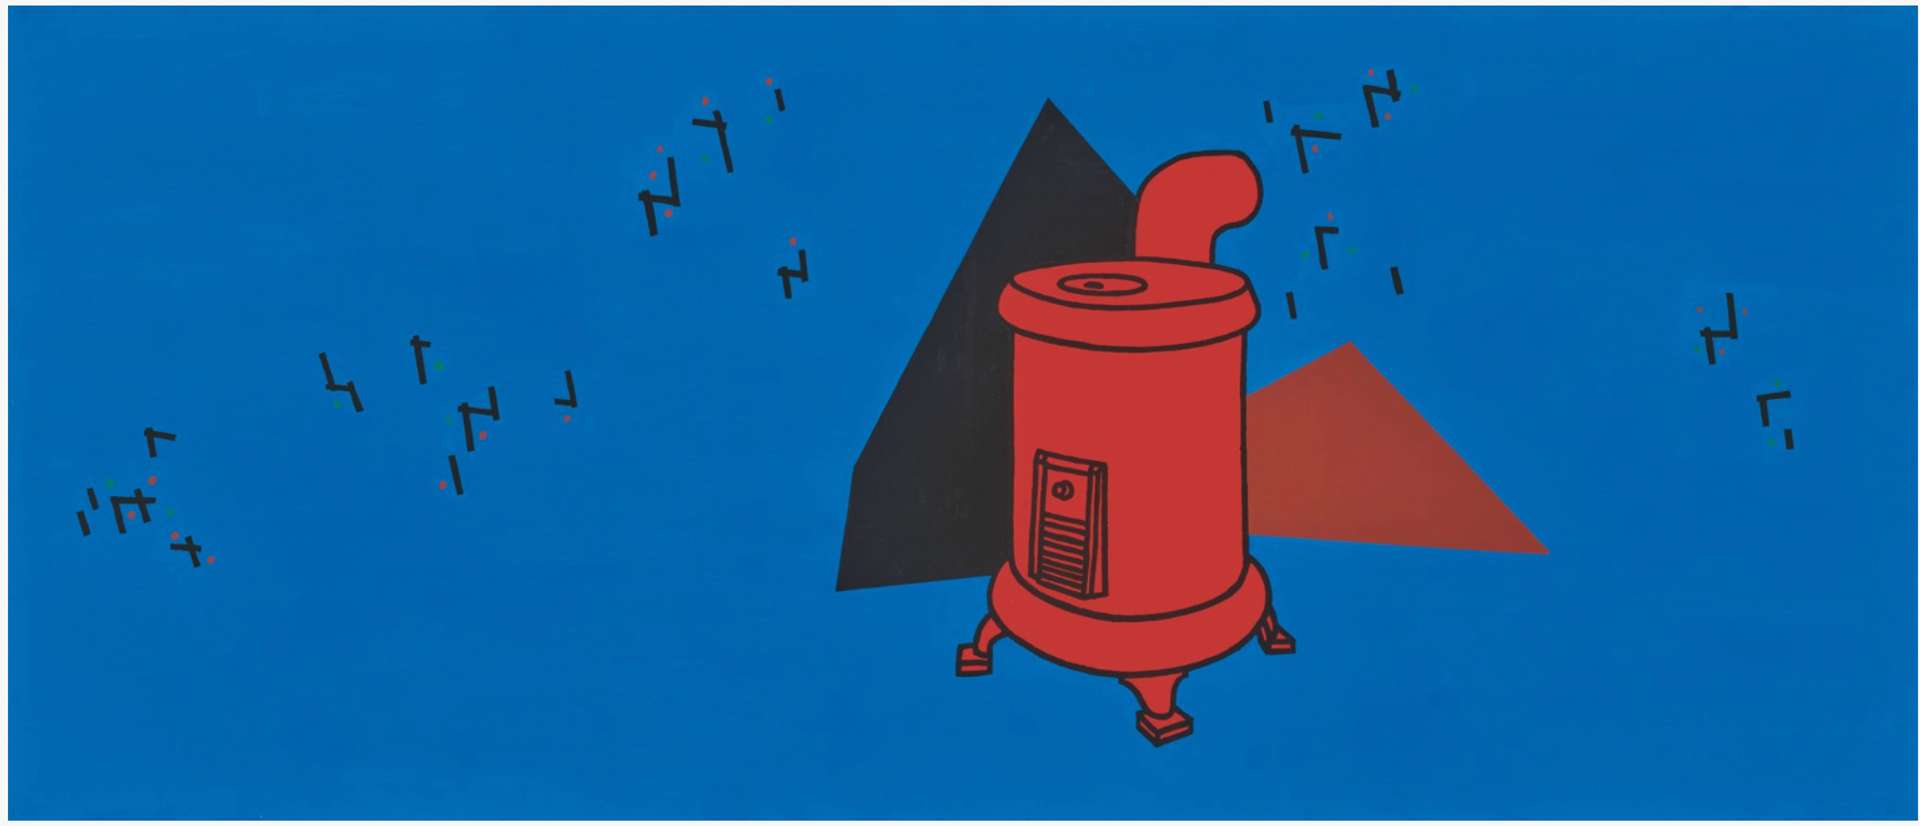  A single red furnace positioned against a vibrant blue background, with a black and red triangle behind it, creating an abstracted effect.